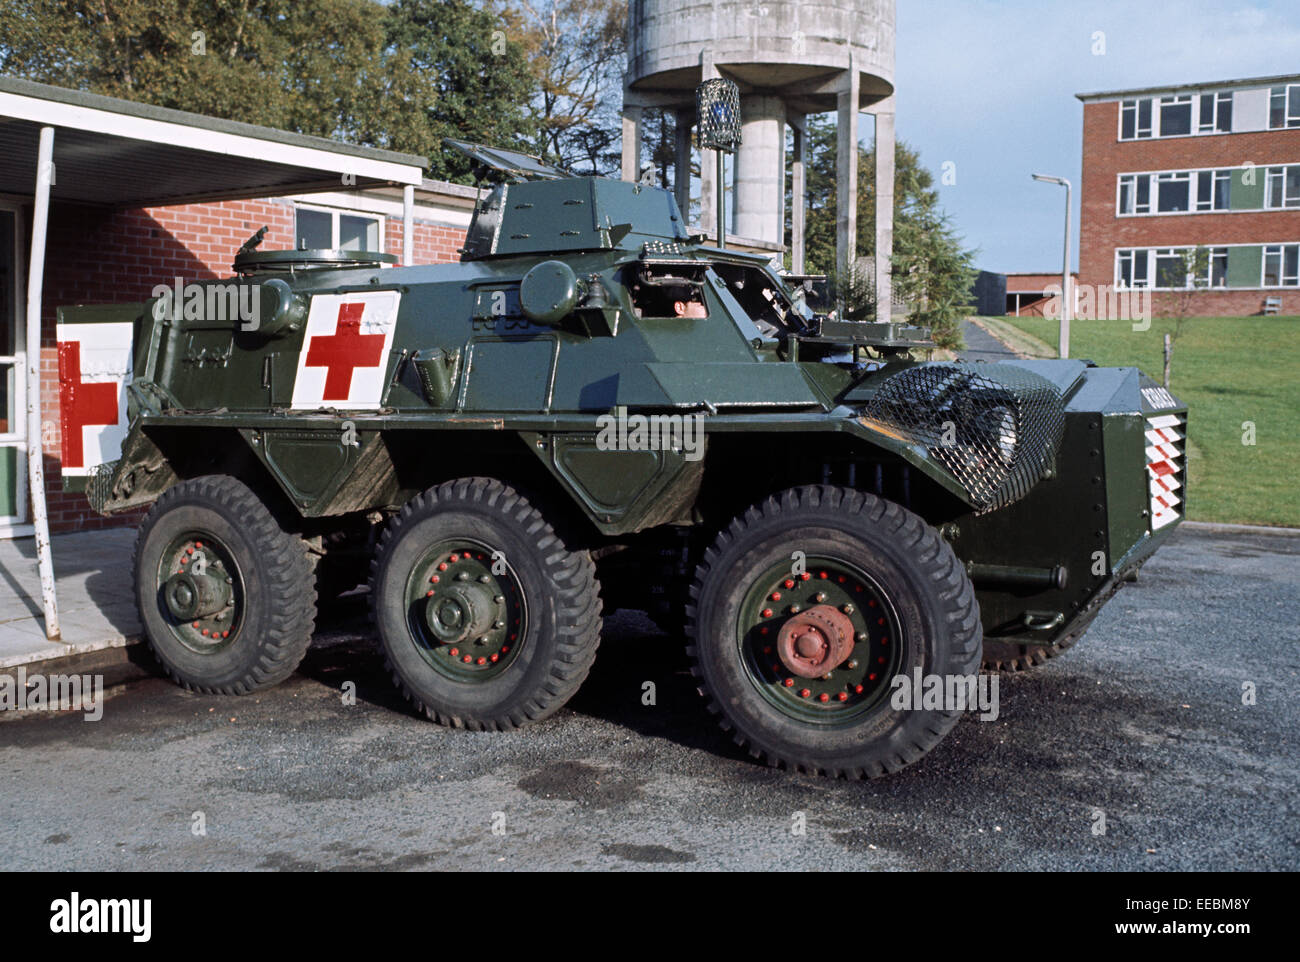 WEAPONS OF ULSTER - FEBRUARY 1972. British Army Saracen Ambulance during The Troubles, Northern Ireland. Stock Photo